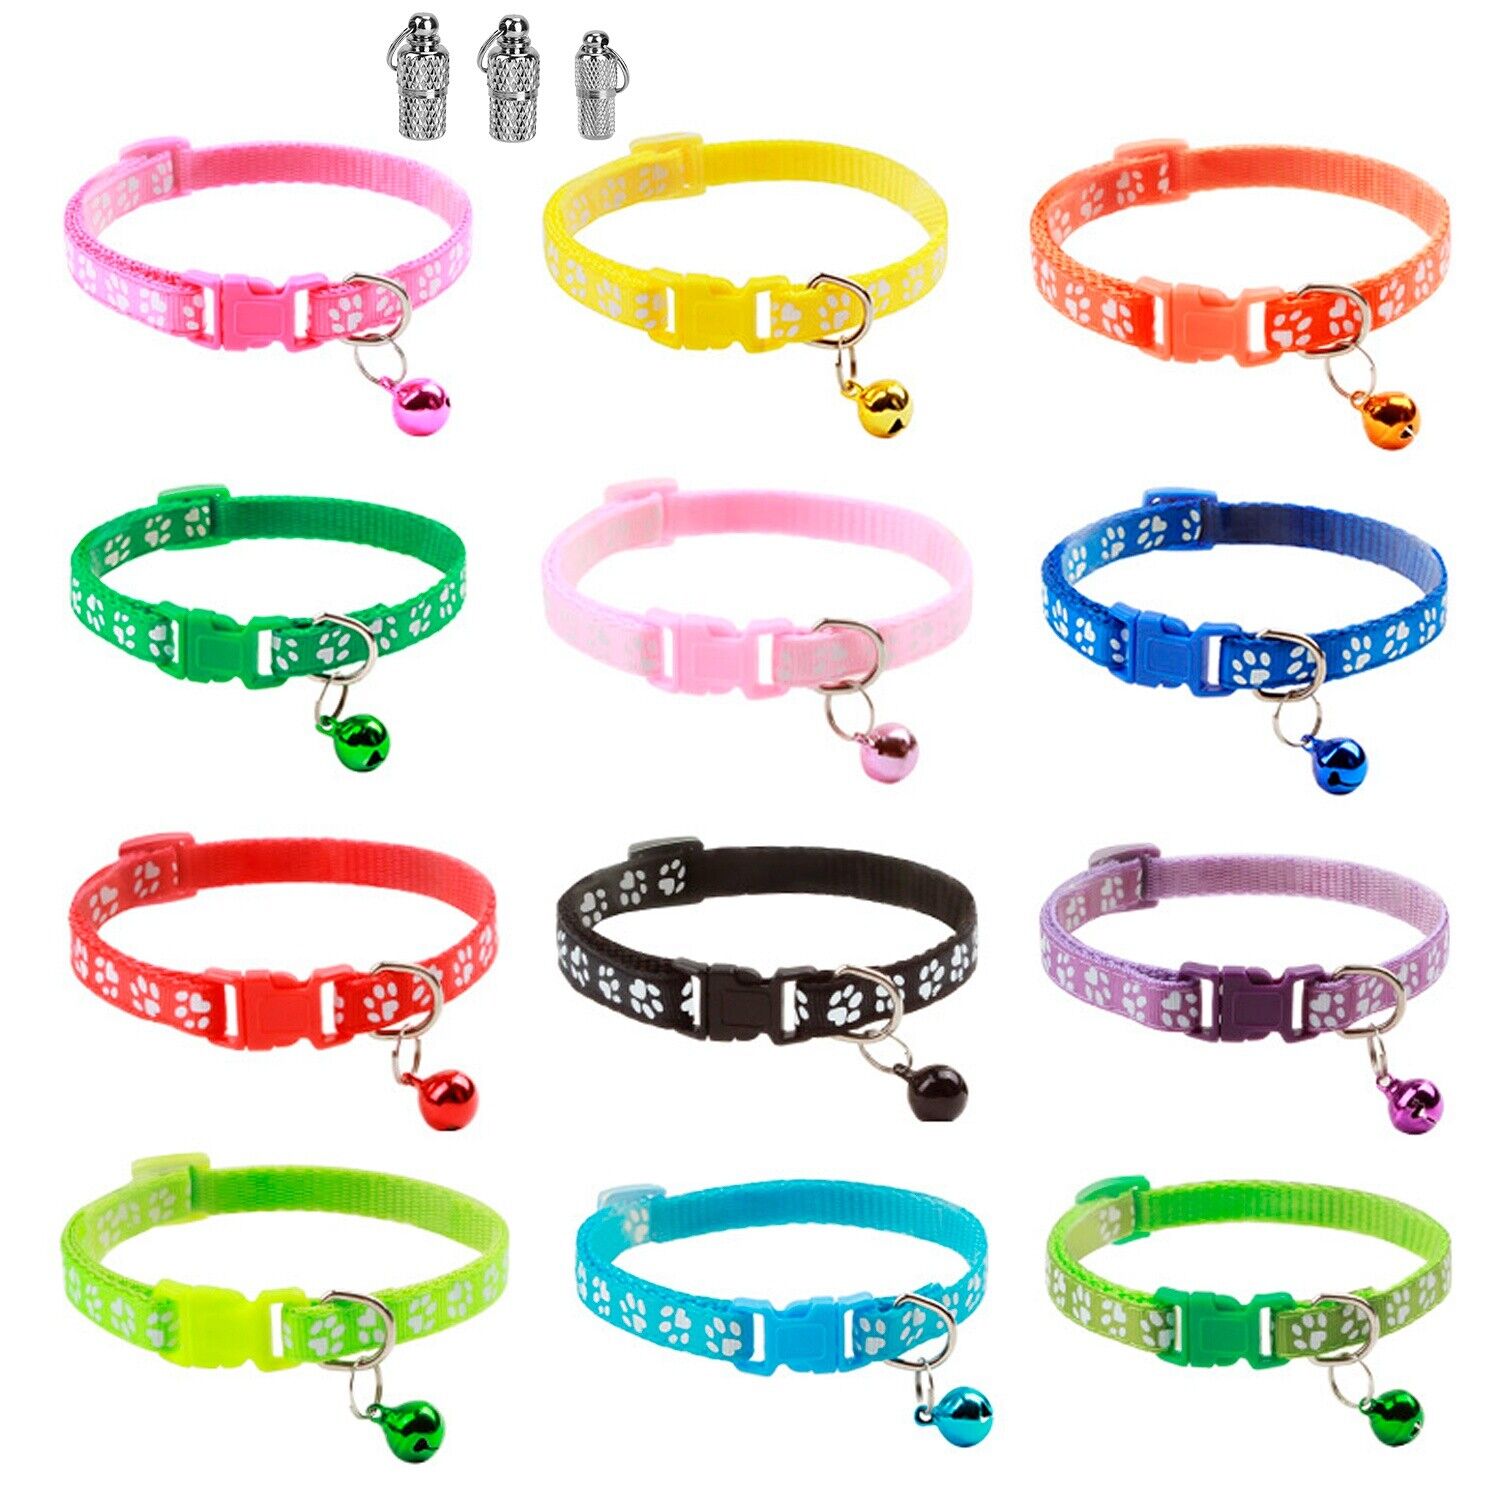 12Pcs Adjustable Bell Name Tag Safety Buckle Collar For Cat kitten Dog Puppy Pet iMounTEK Does not apply - фотография #11